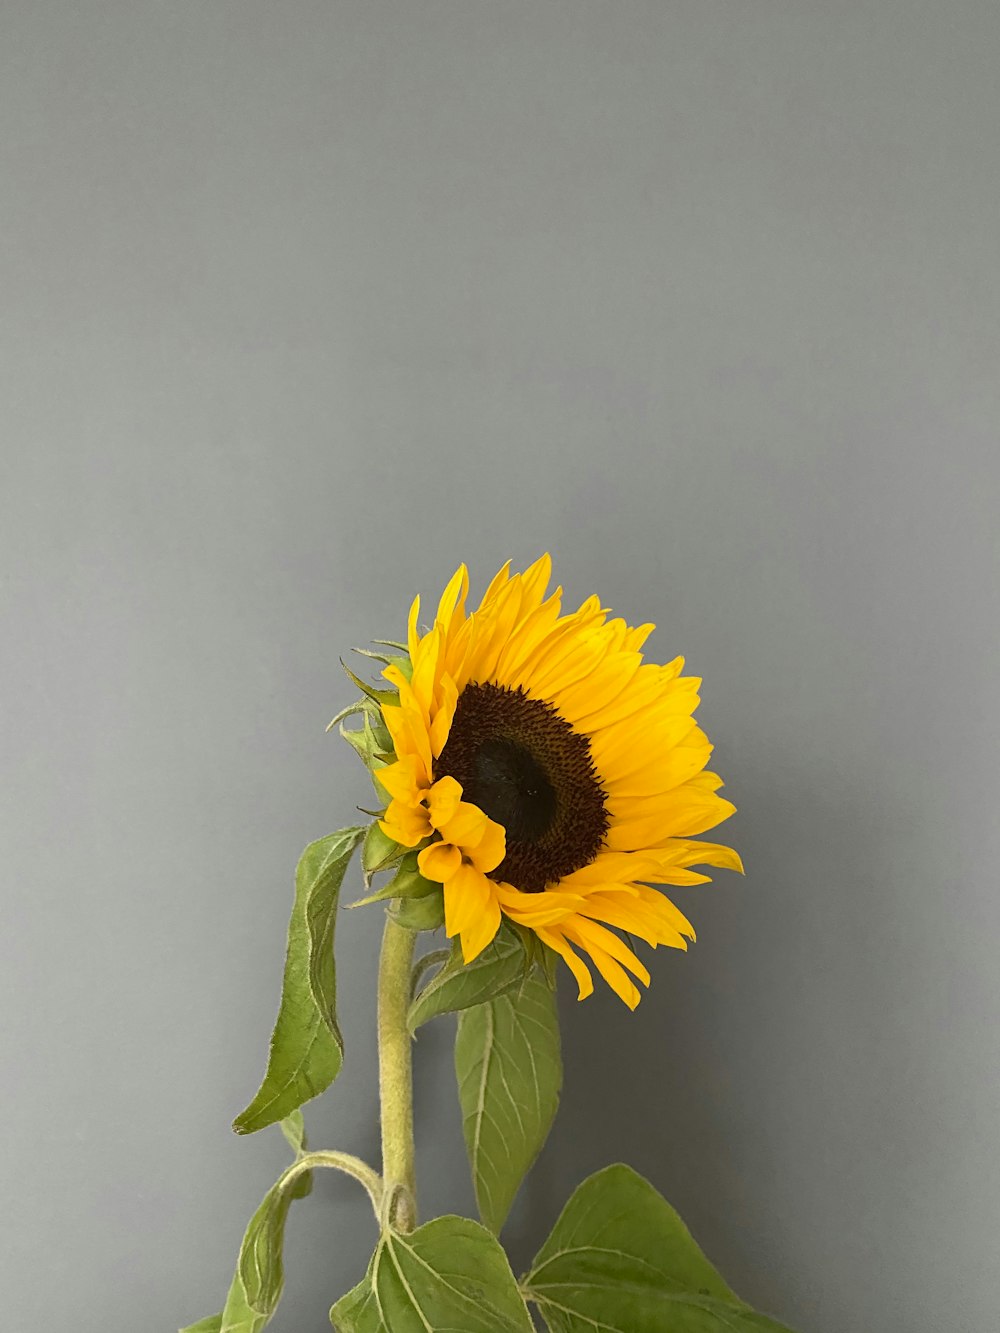 a yellow sunflower with green leaves on a gray background